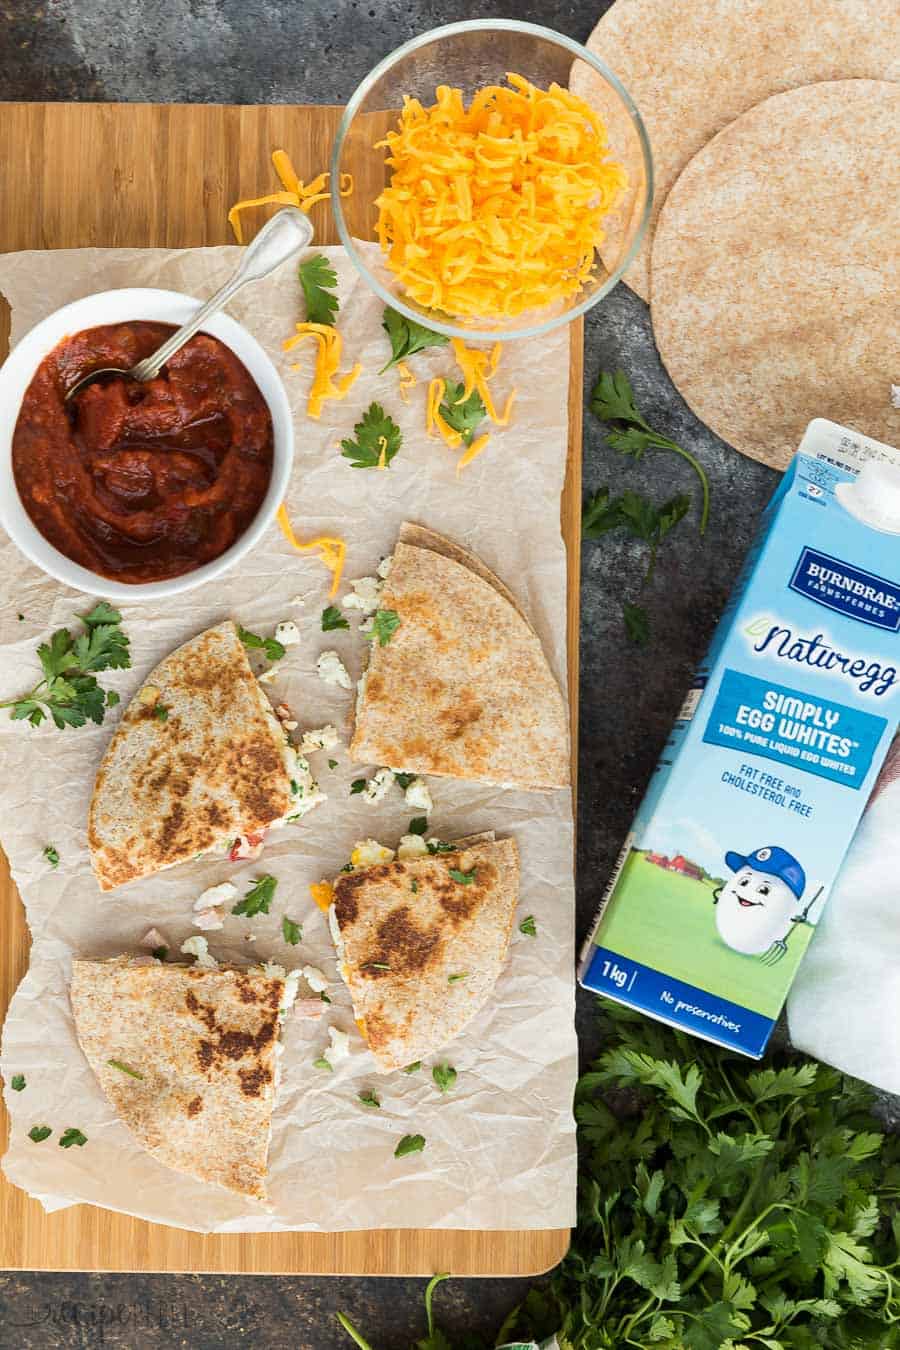 These Make Ahead Breakfast Quesadillas are the perfect healthy breakfast, lunch or dinner! They're easy to make for your week's meal prep, freezer friendly and totally customizable. A step by step recipe video shows you 4 different ways to make them: Broccoli Cheddar; Three Cheese Pesto; Roasted Red Pepper, Spinach and Parmesan; and Denver. | meal prep | make ahead breakfast | freezer breakfast quesadillas | freezer meal | #mealprep #makeahead #breakfast #freezermeal